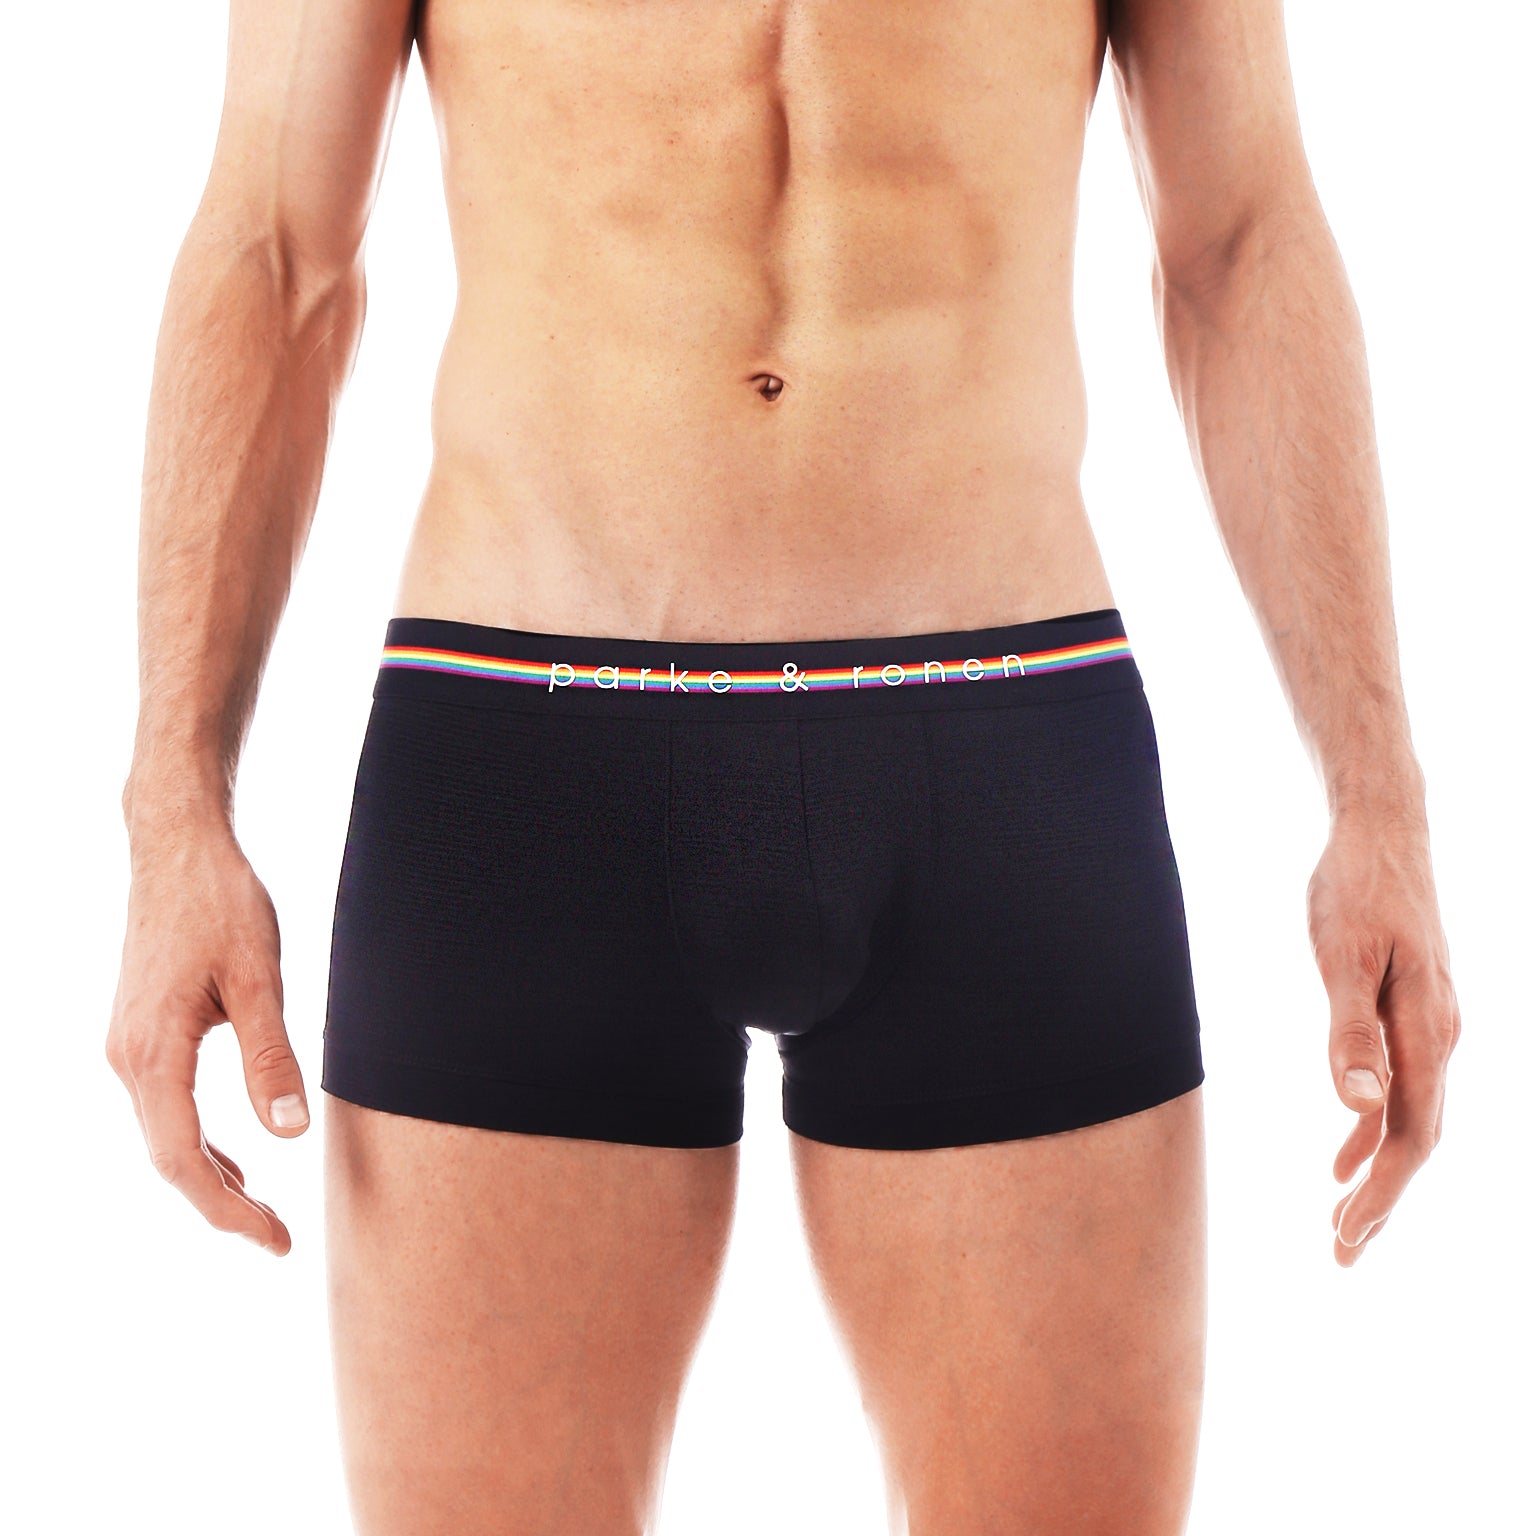 LIMITED PRIDE EDITION- Black Heather Mesh Low Rise Trunk